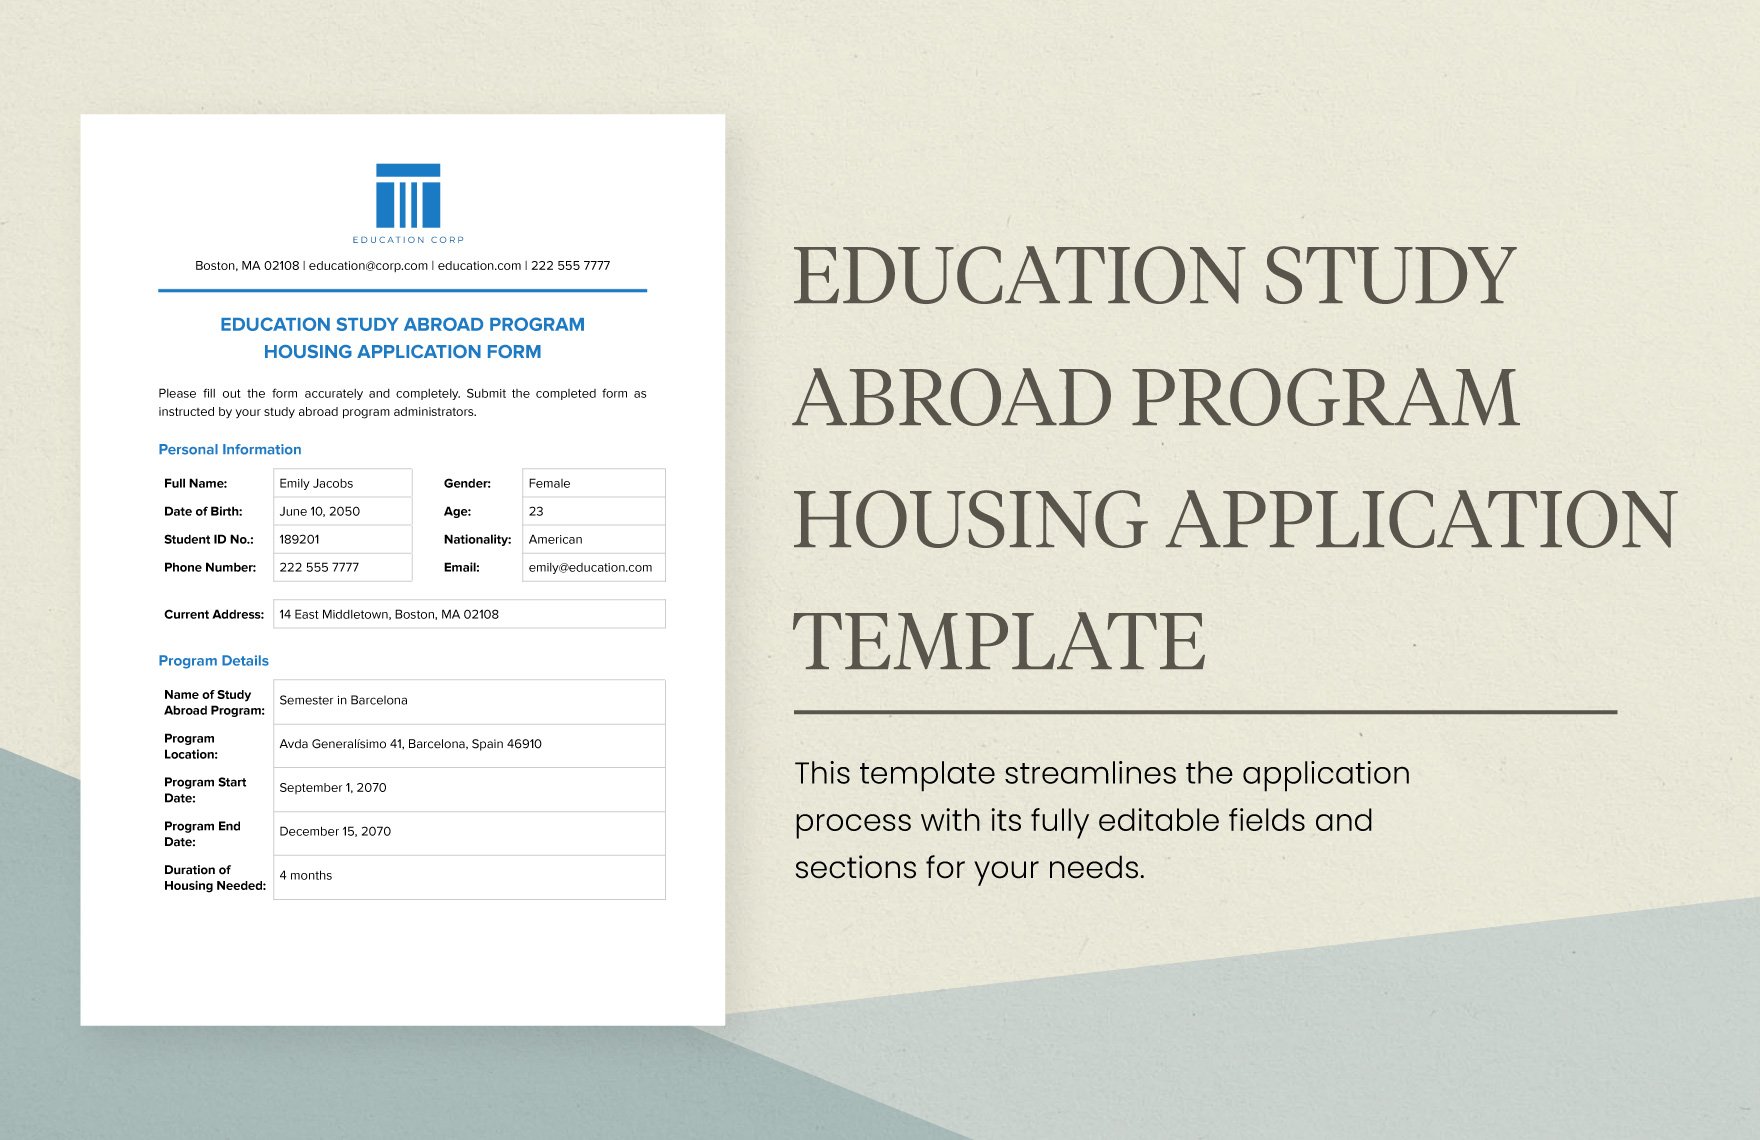 Education Study Abroad Program Housing Application Form Template in Word, Google Docs, PDF